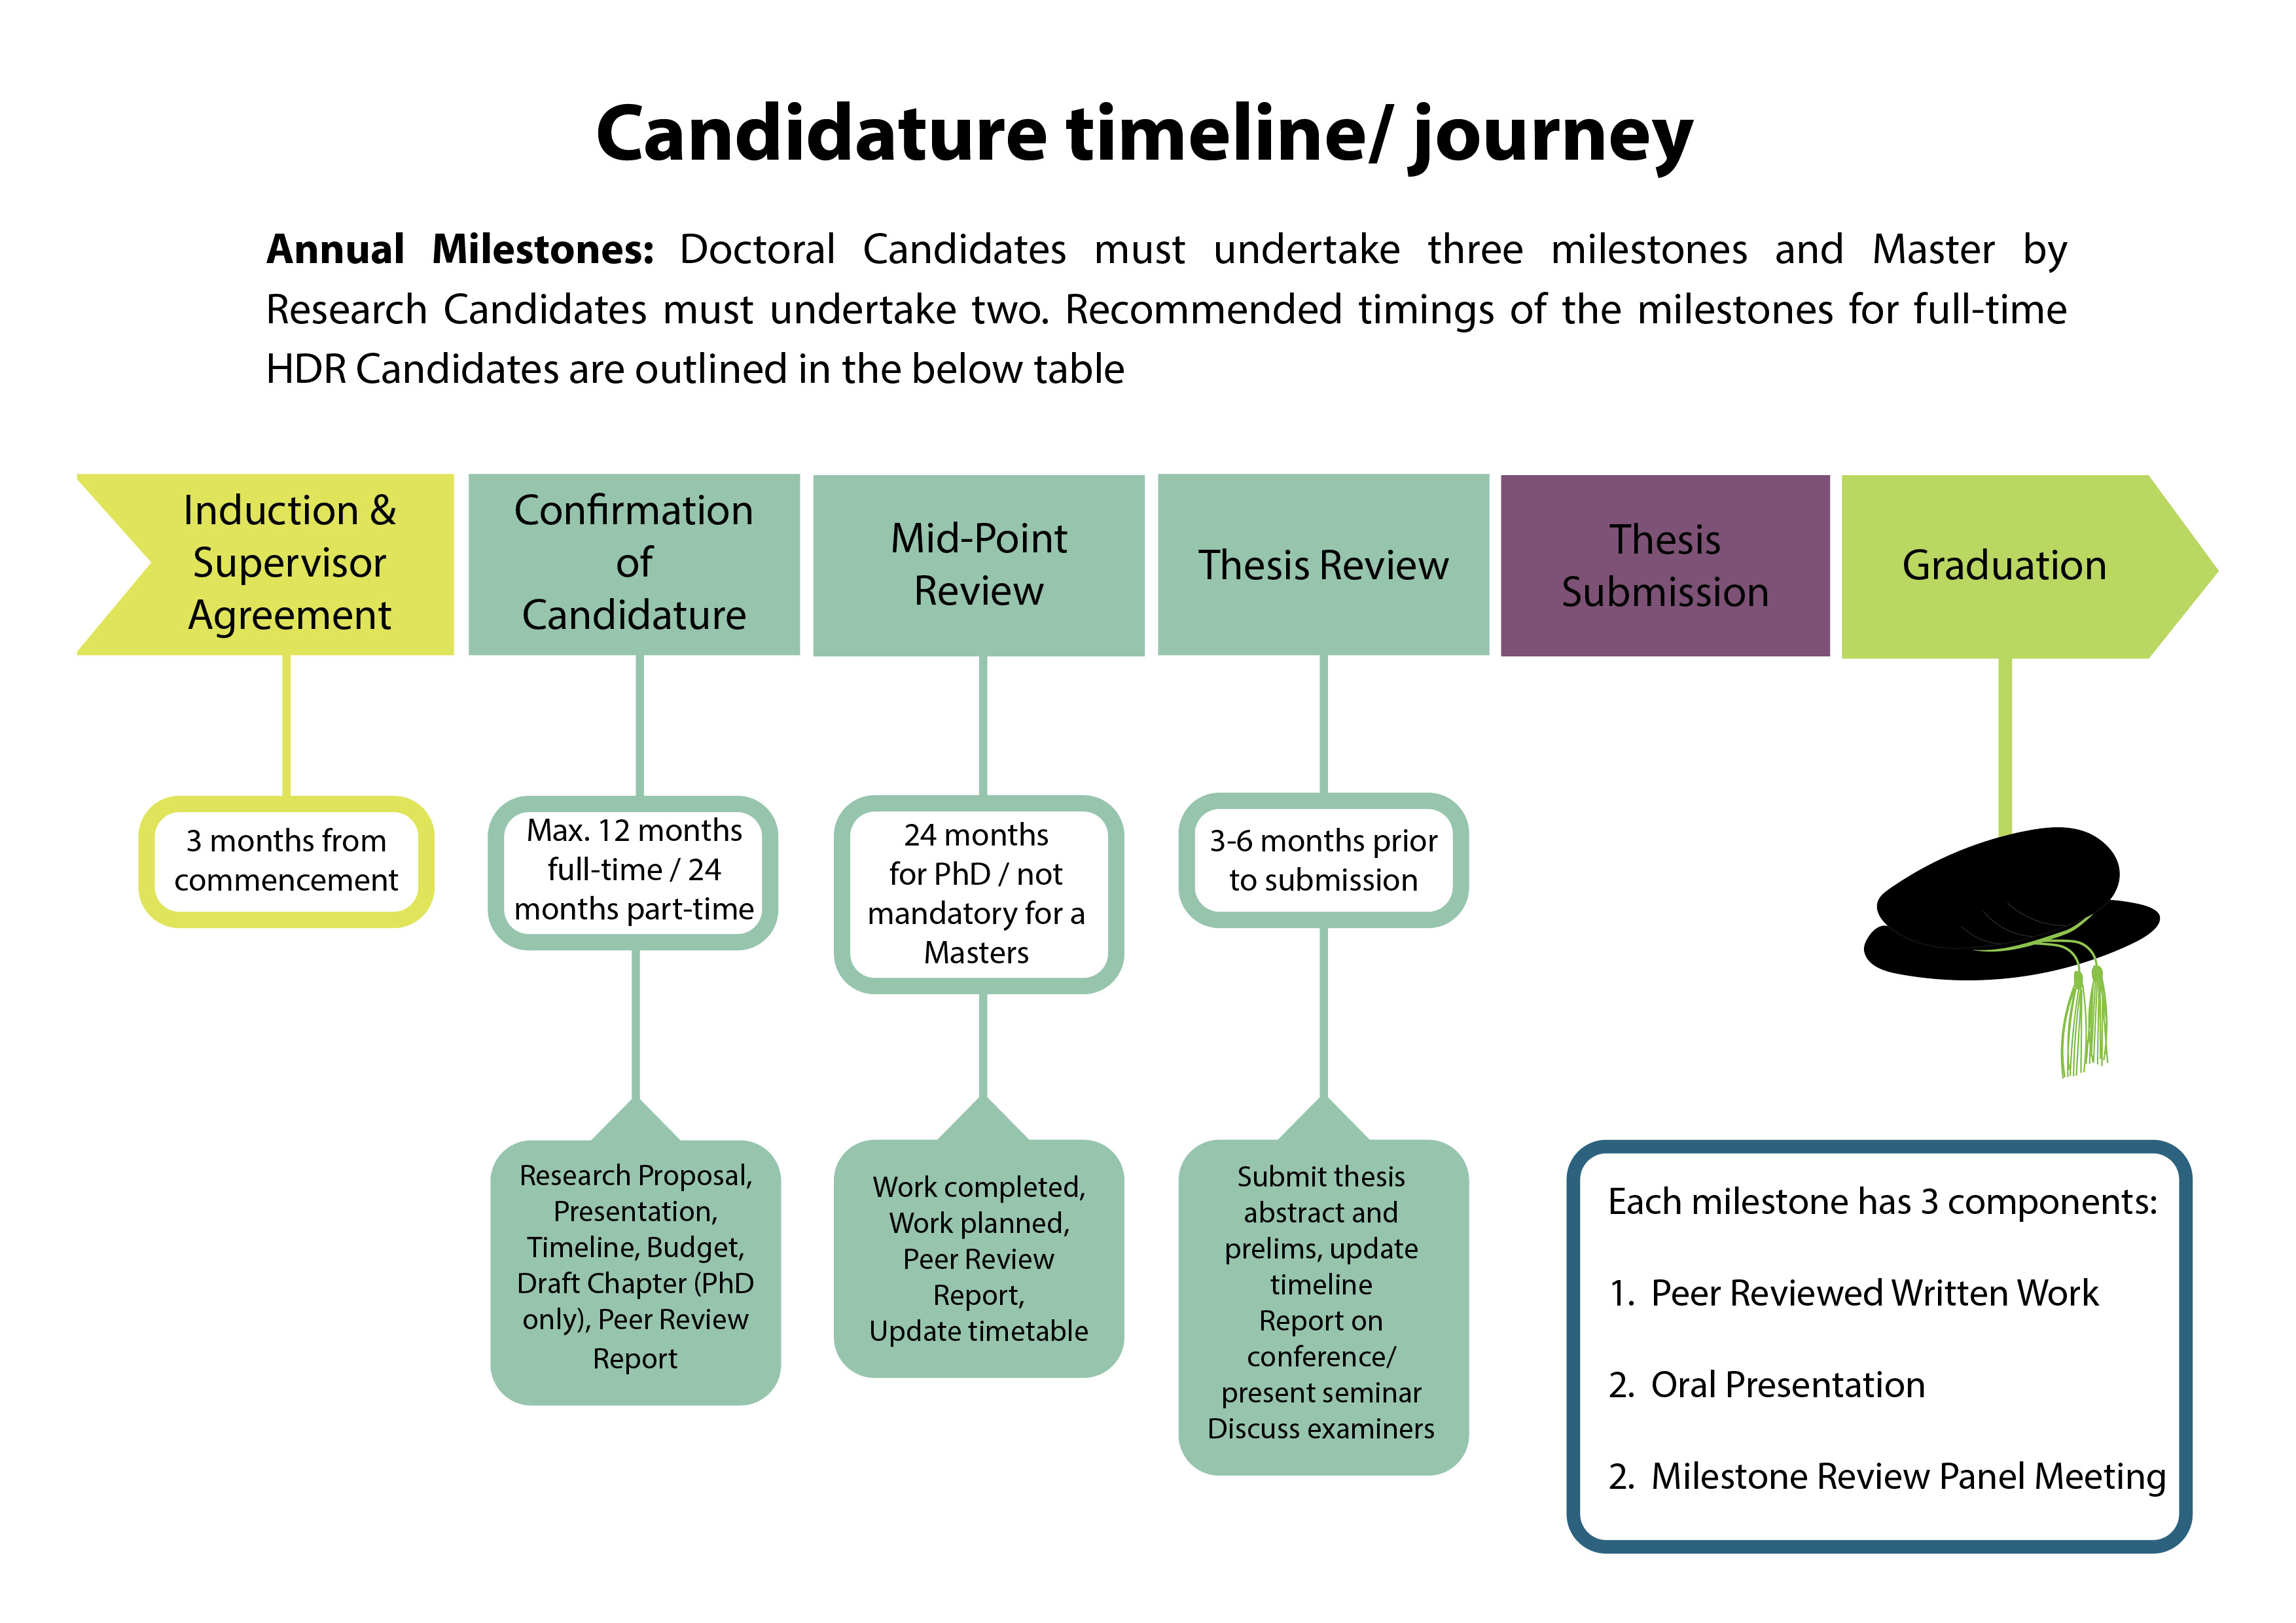 HDR Candidature Timeline and Journey